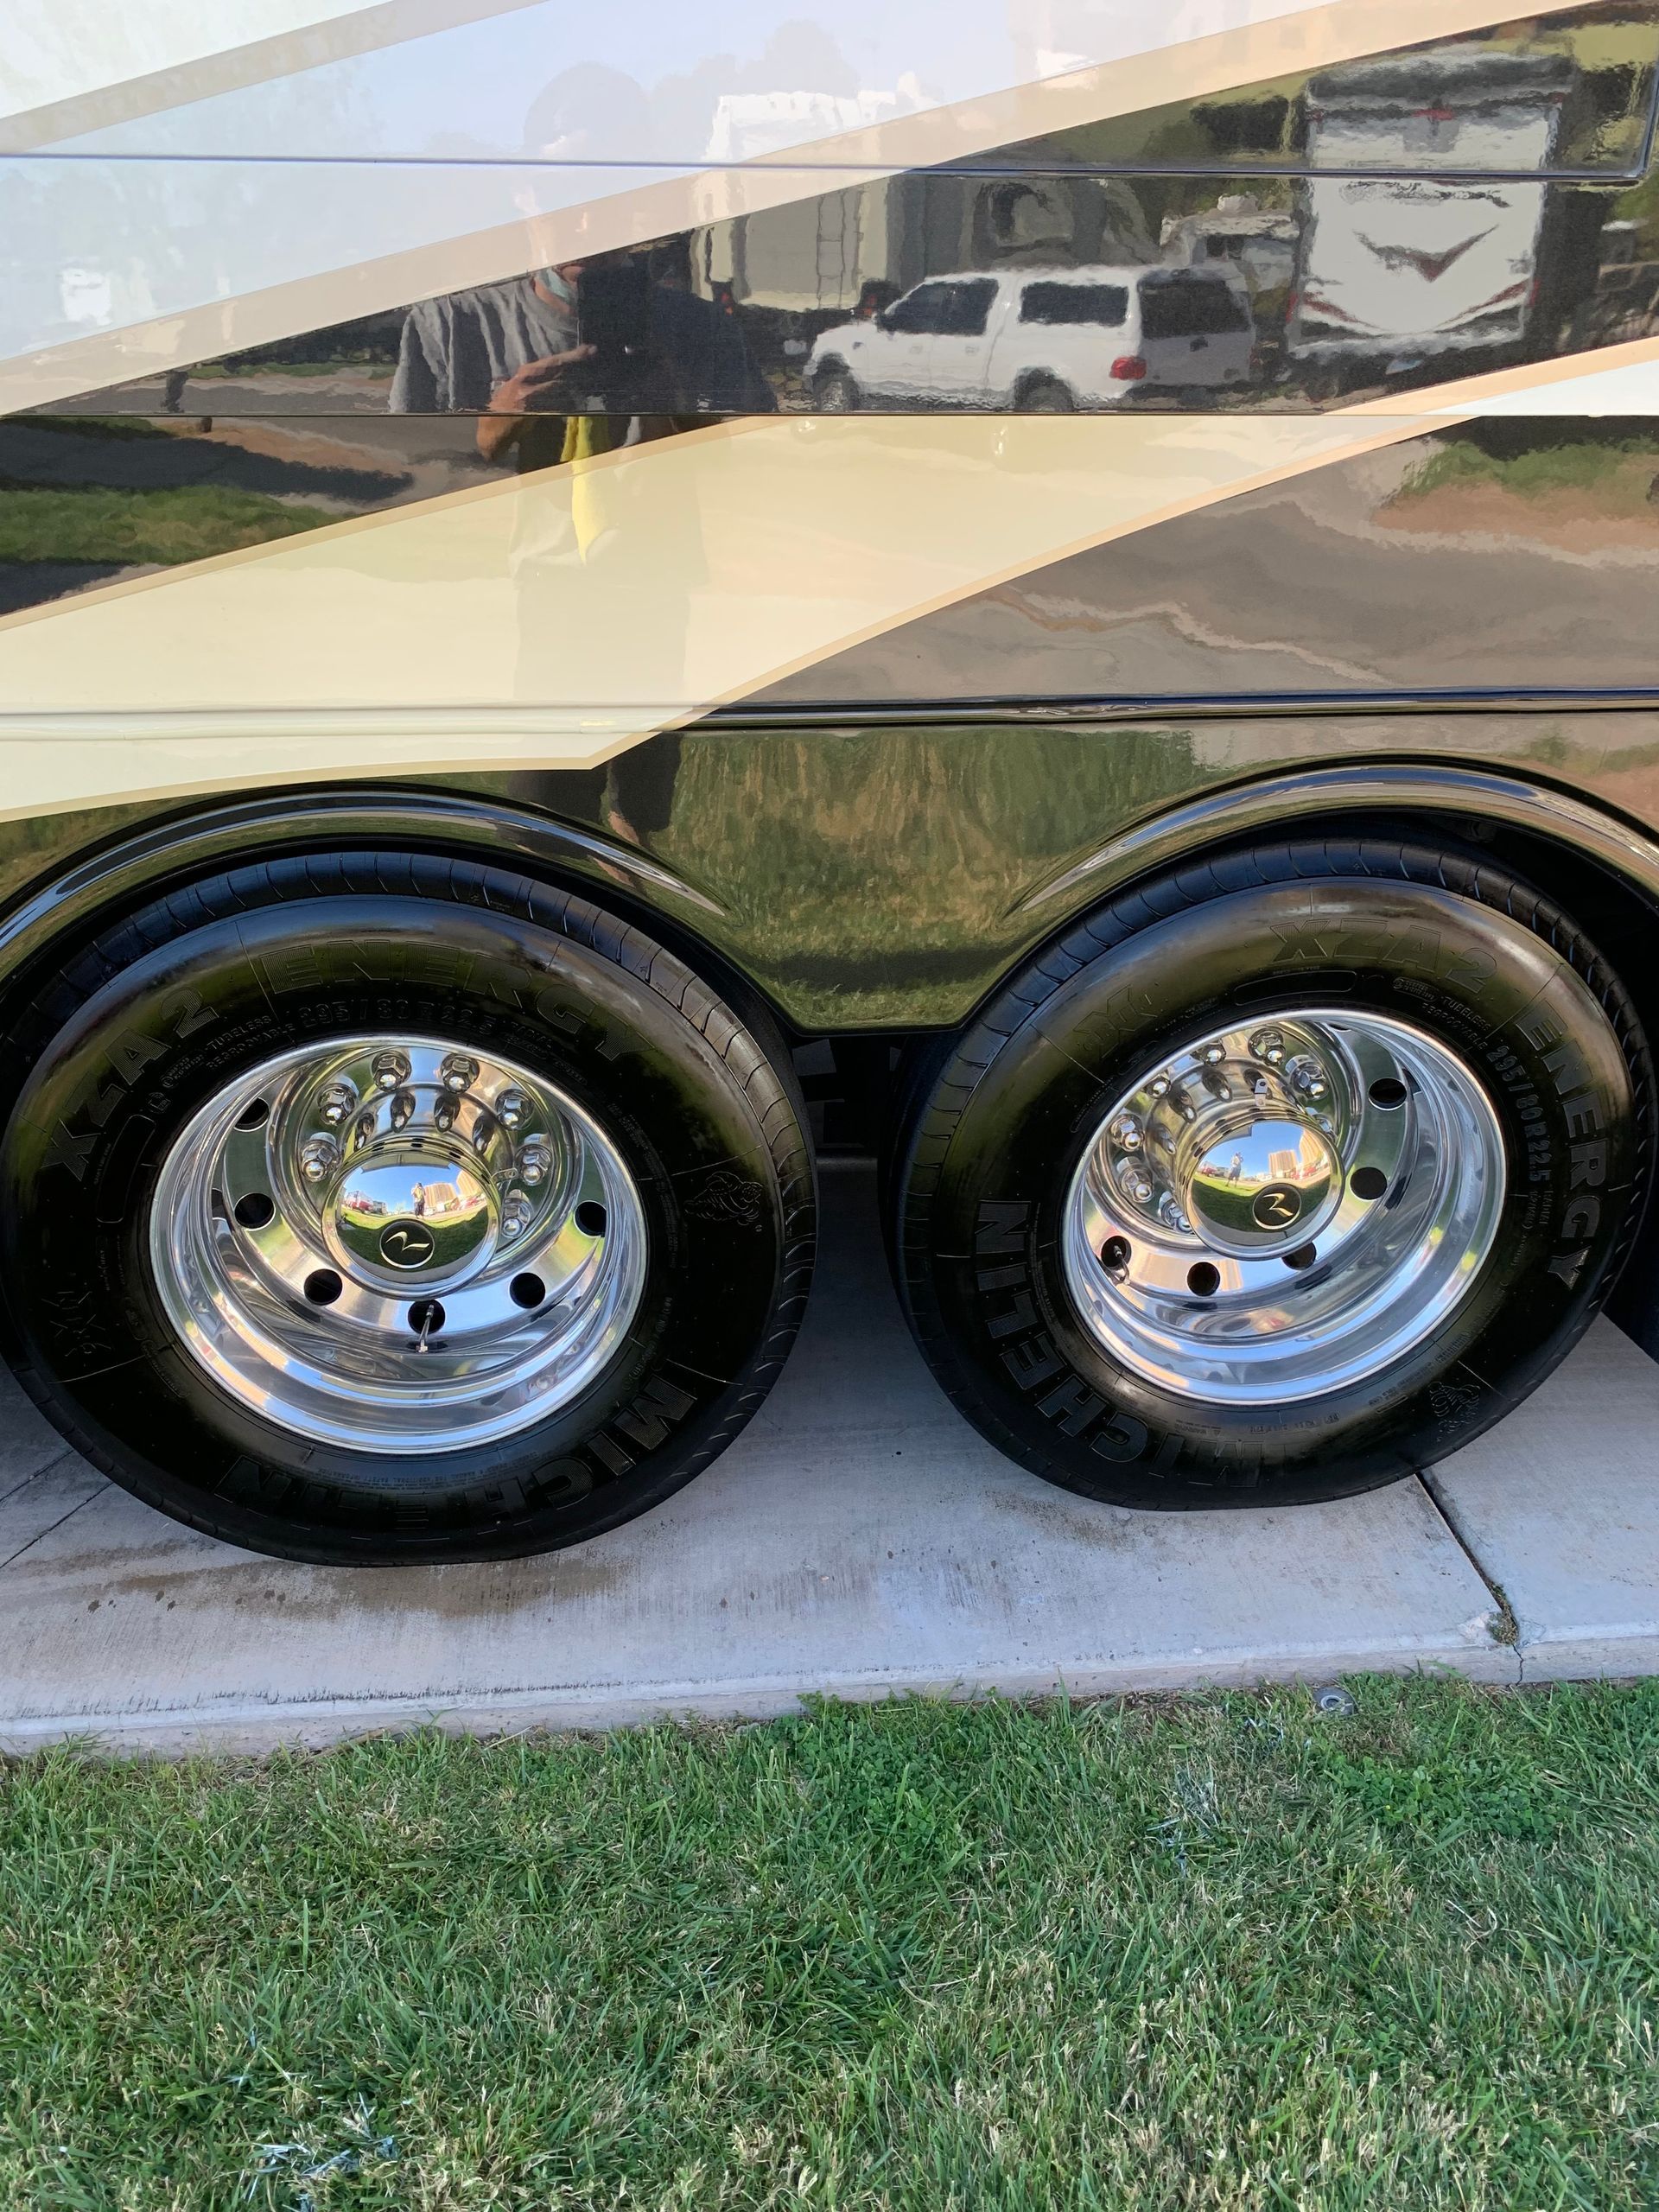 A close up of a trailer 's wheels and tires.